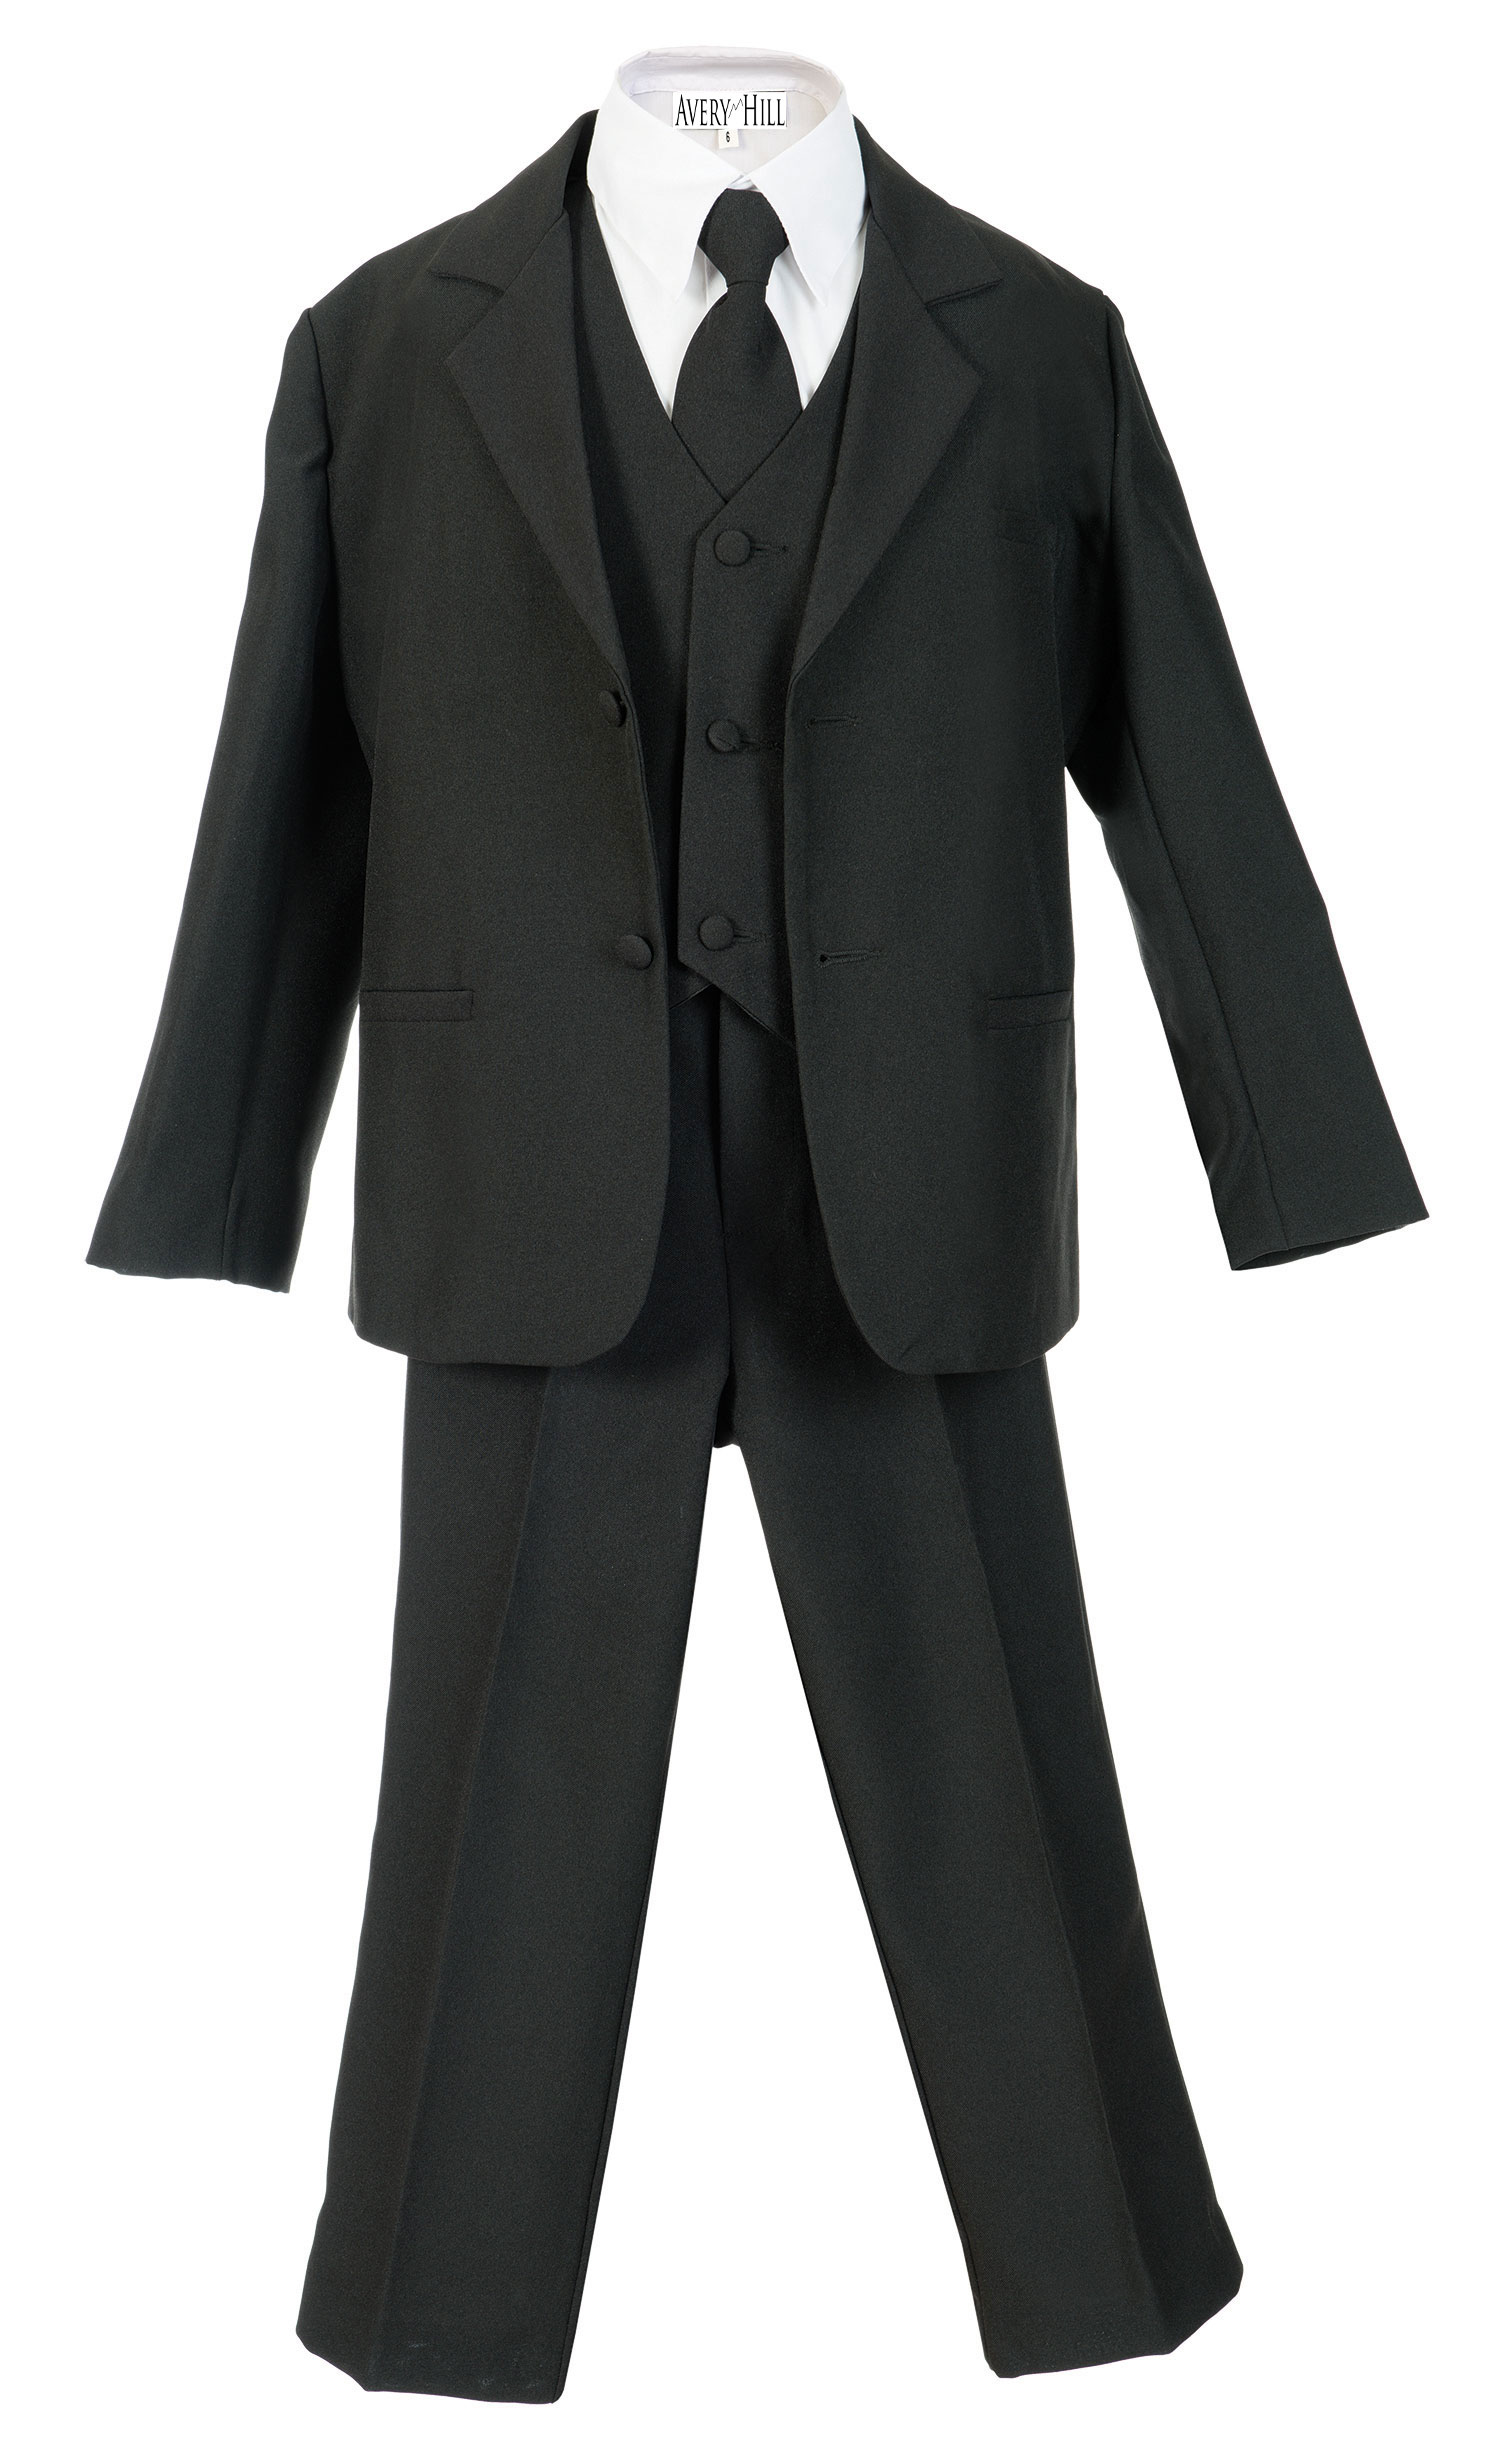 Avery Hill Boys Formal 5 Piece Suit with Shirt and Vest Black - 2T